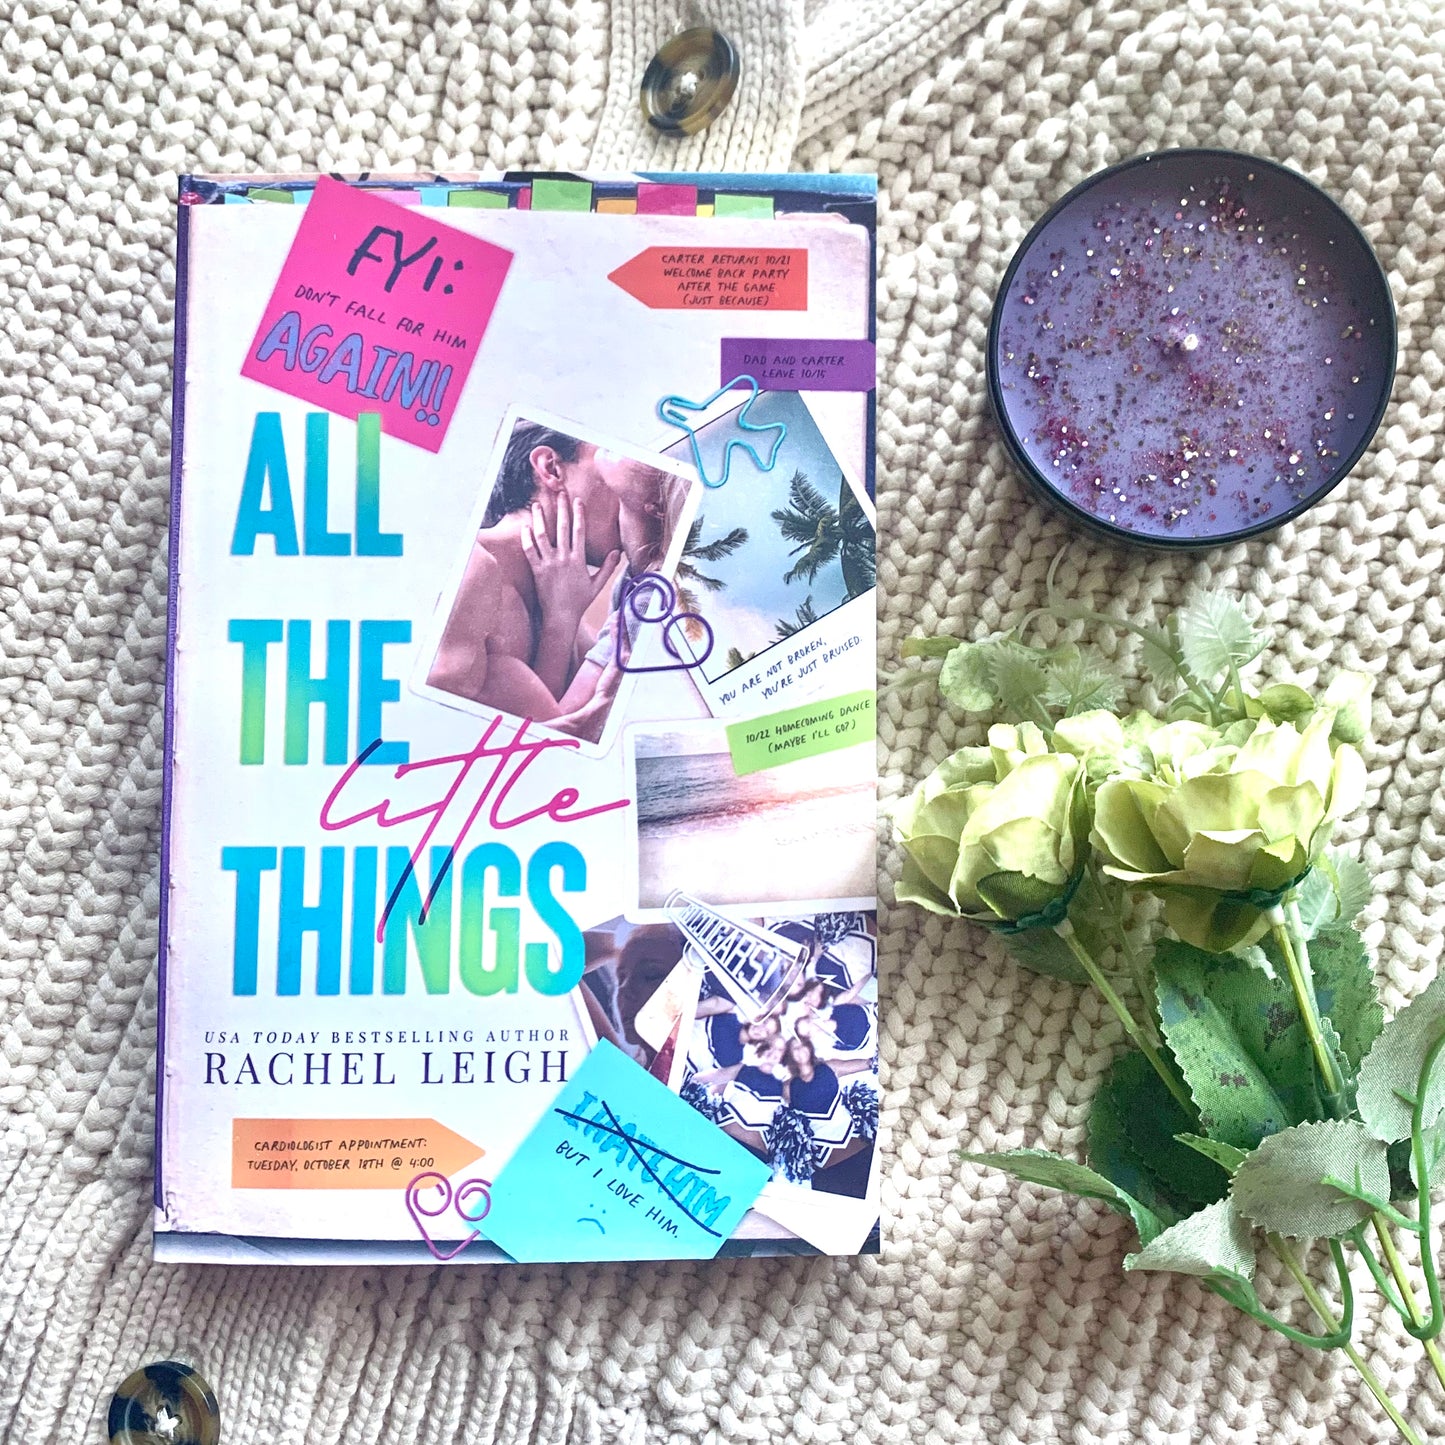 All The Little Things by Rachel Leigh